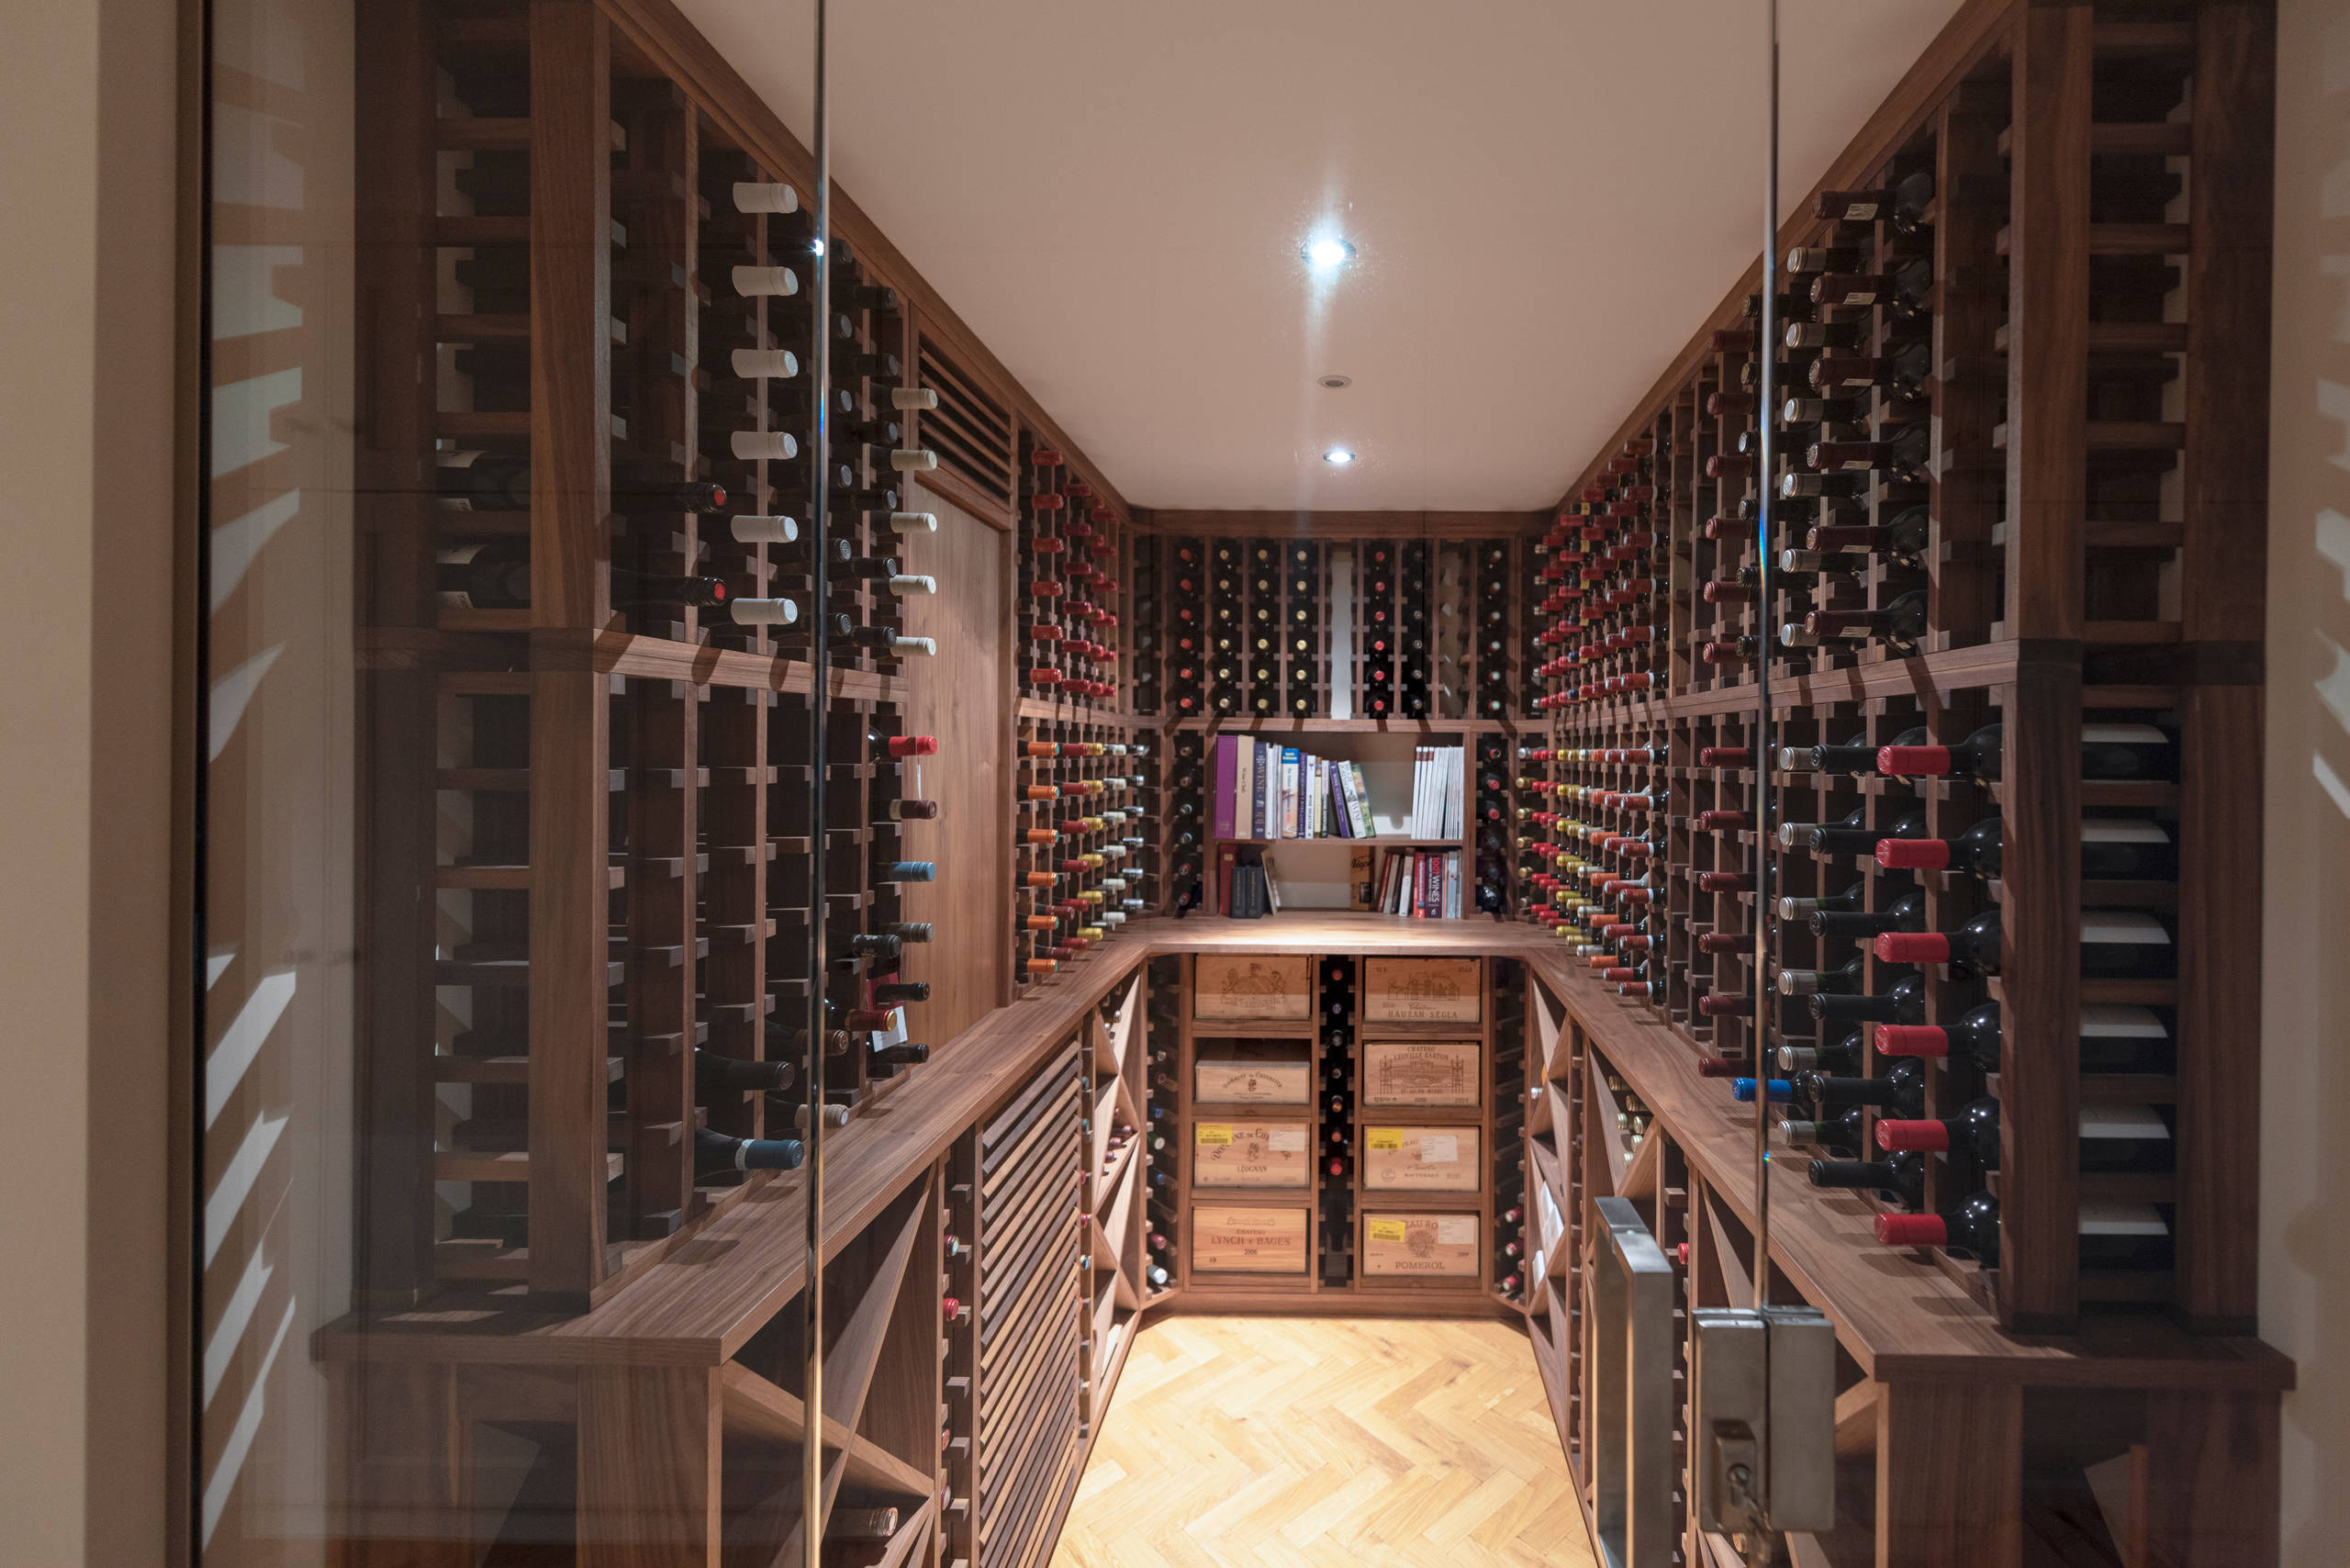 Individually designed and handmade American black walnut wine cellar/room. For a large basement conversion in central London.